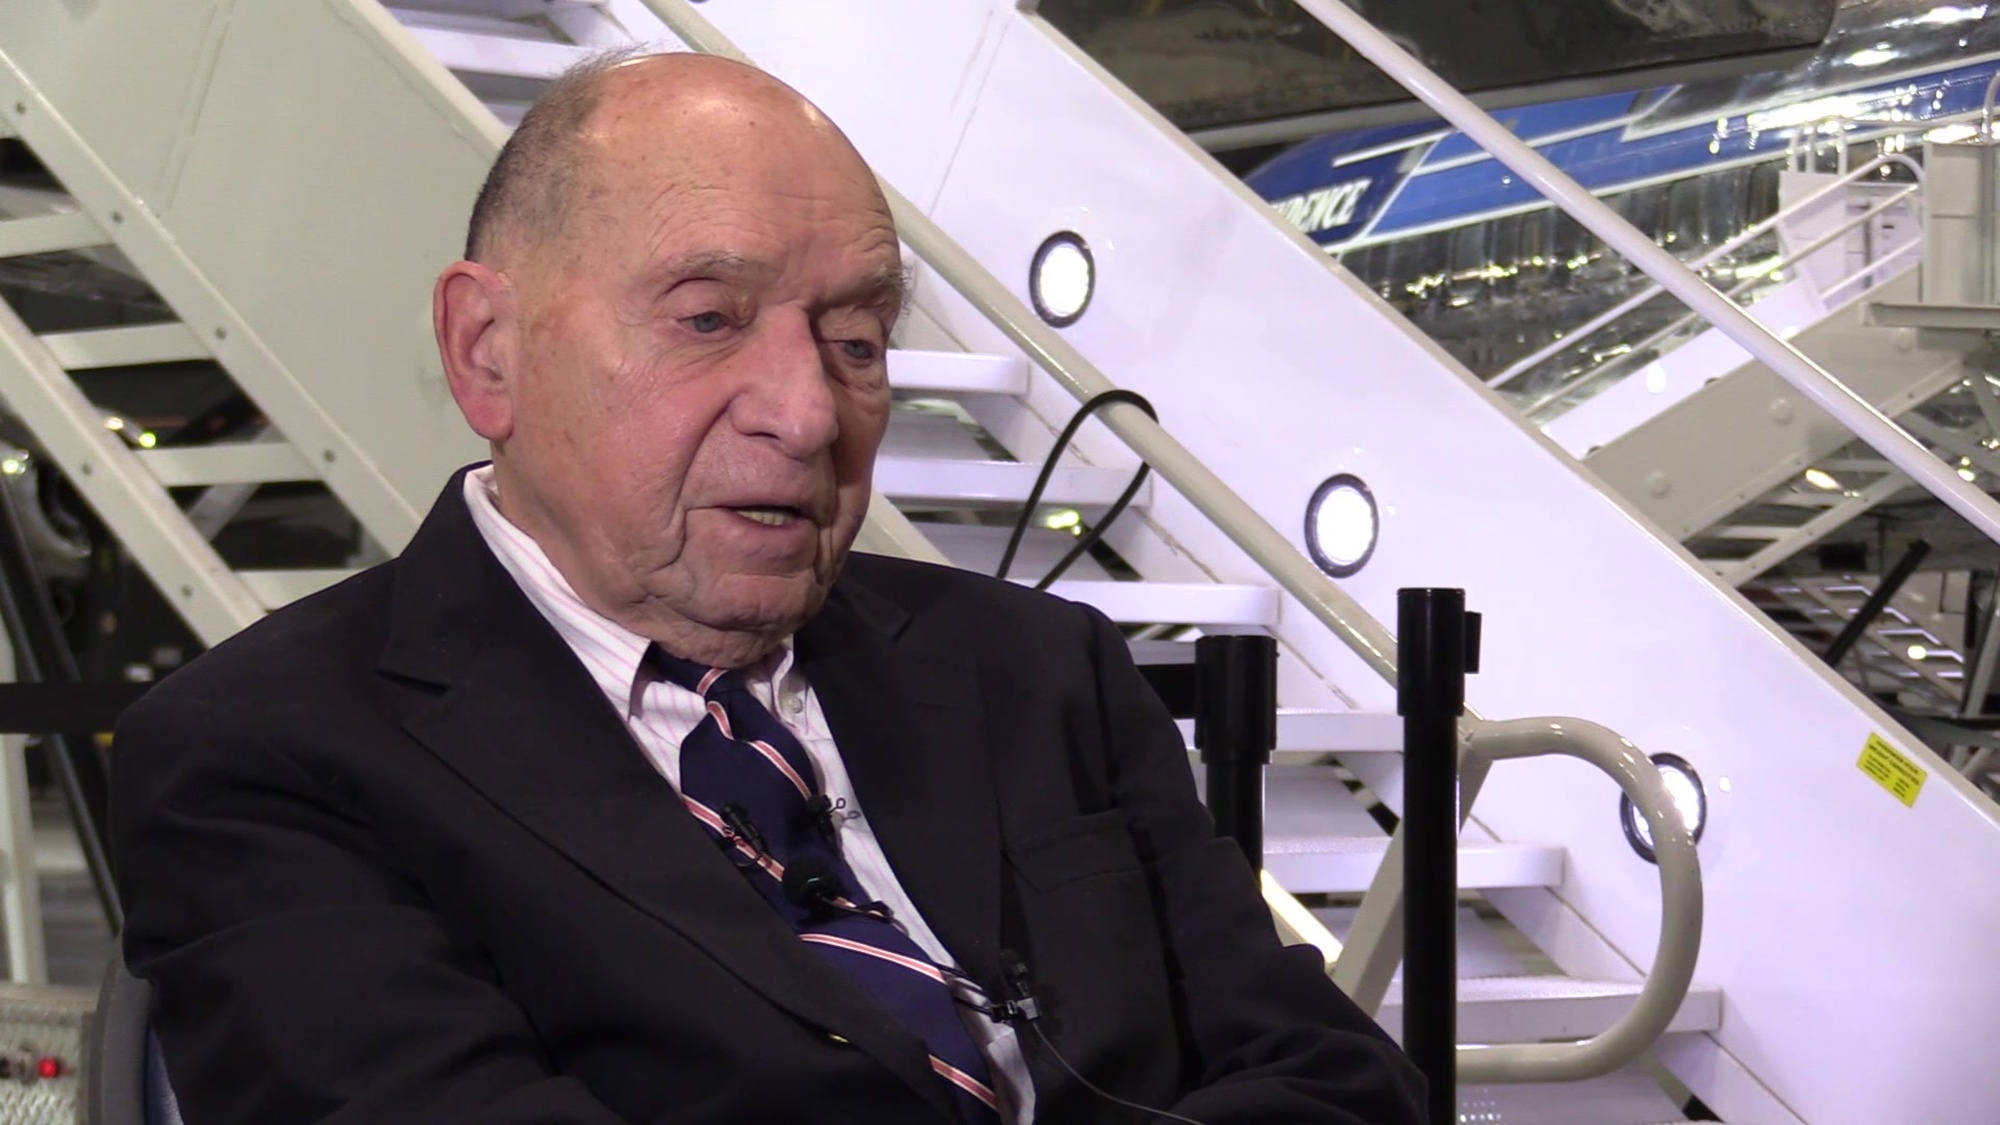 Here's an interview with former White House pool reporter Sid Davis, who visited the museum taking a tour of SAM 26000, the Presidential aircraft that carried John F. Kennedy’s body from Dallas to Washington D.C. on Nov. 22, 1963. Visitors can view this aircraft in the museum's Presidential Gallery.